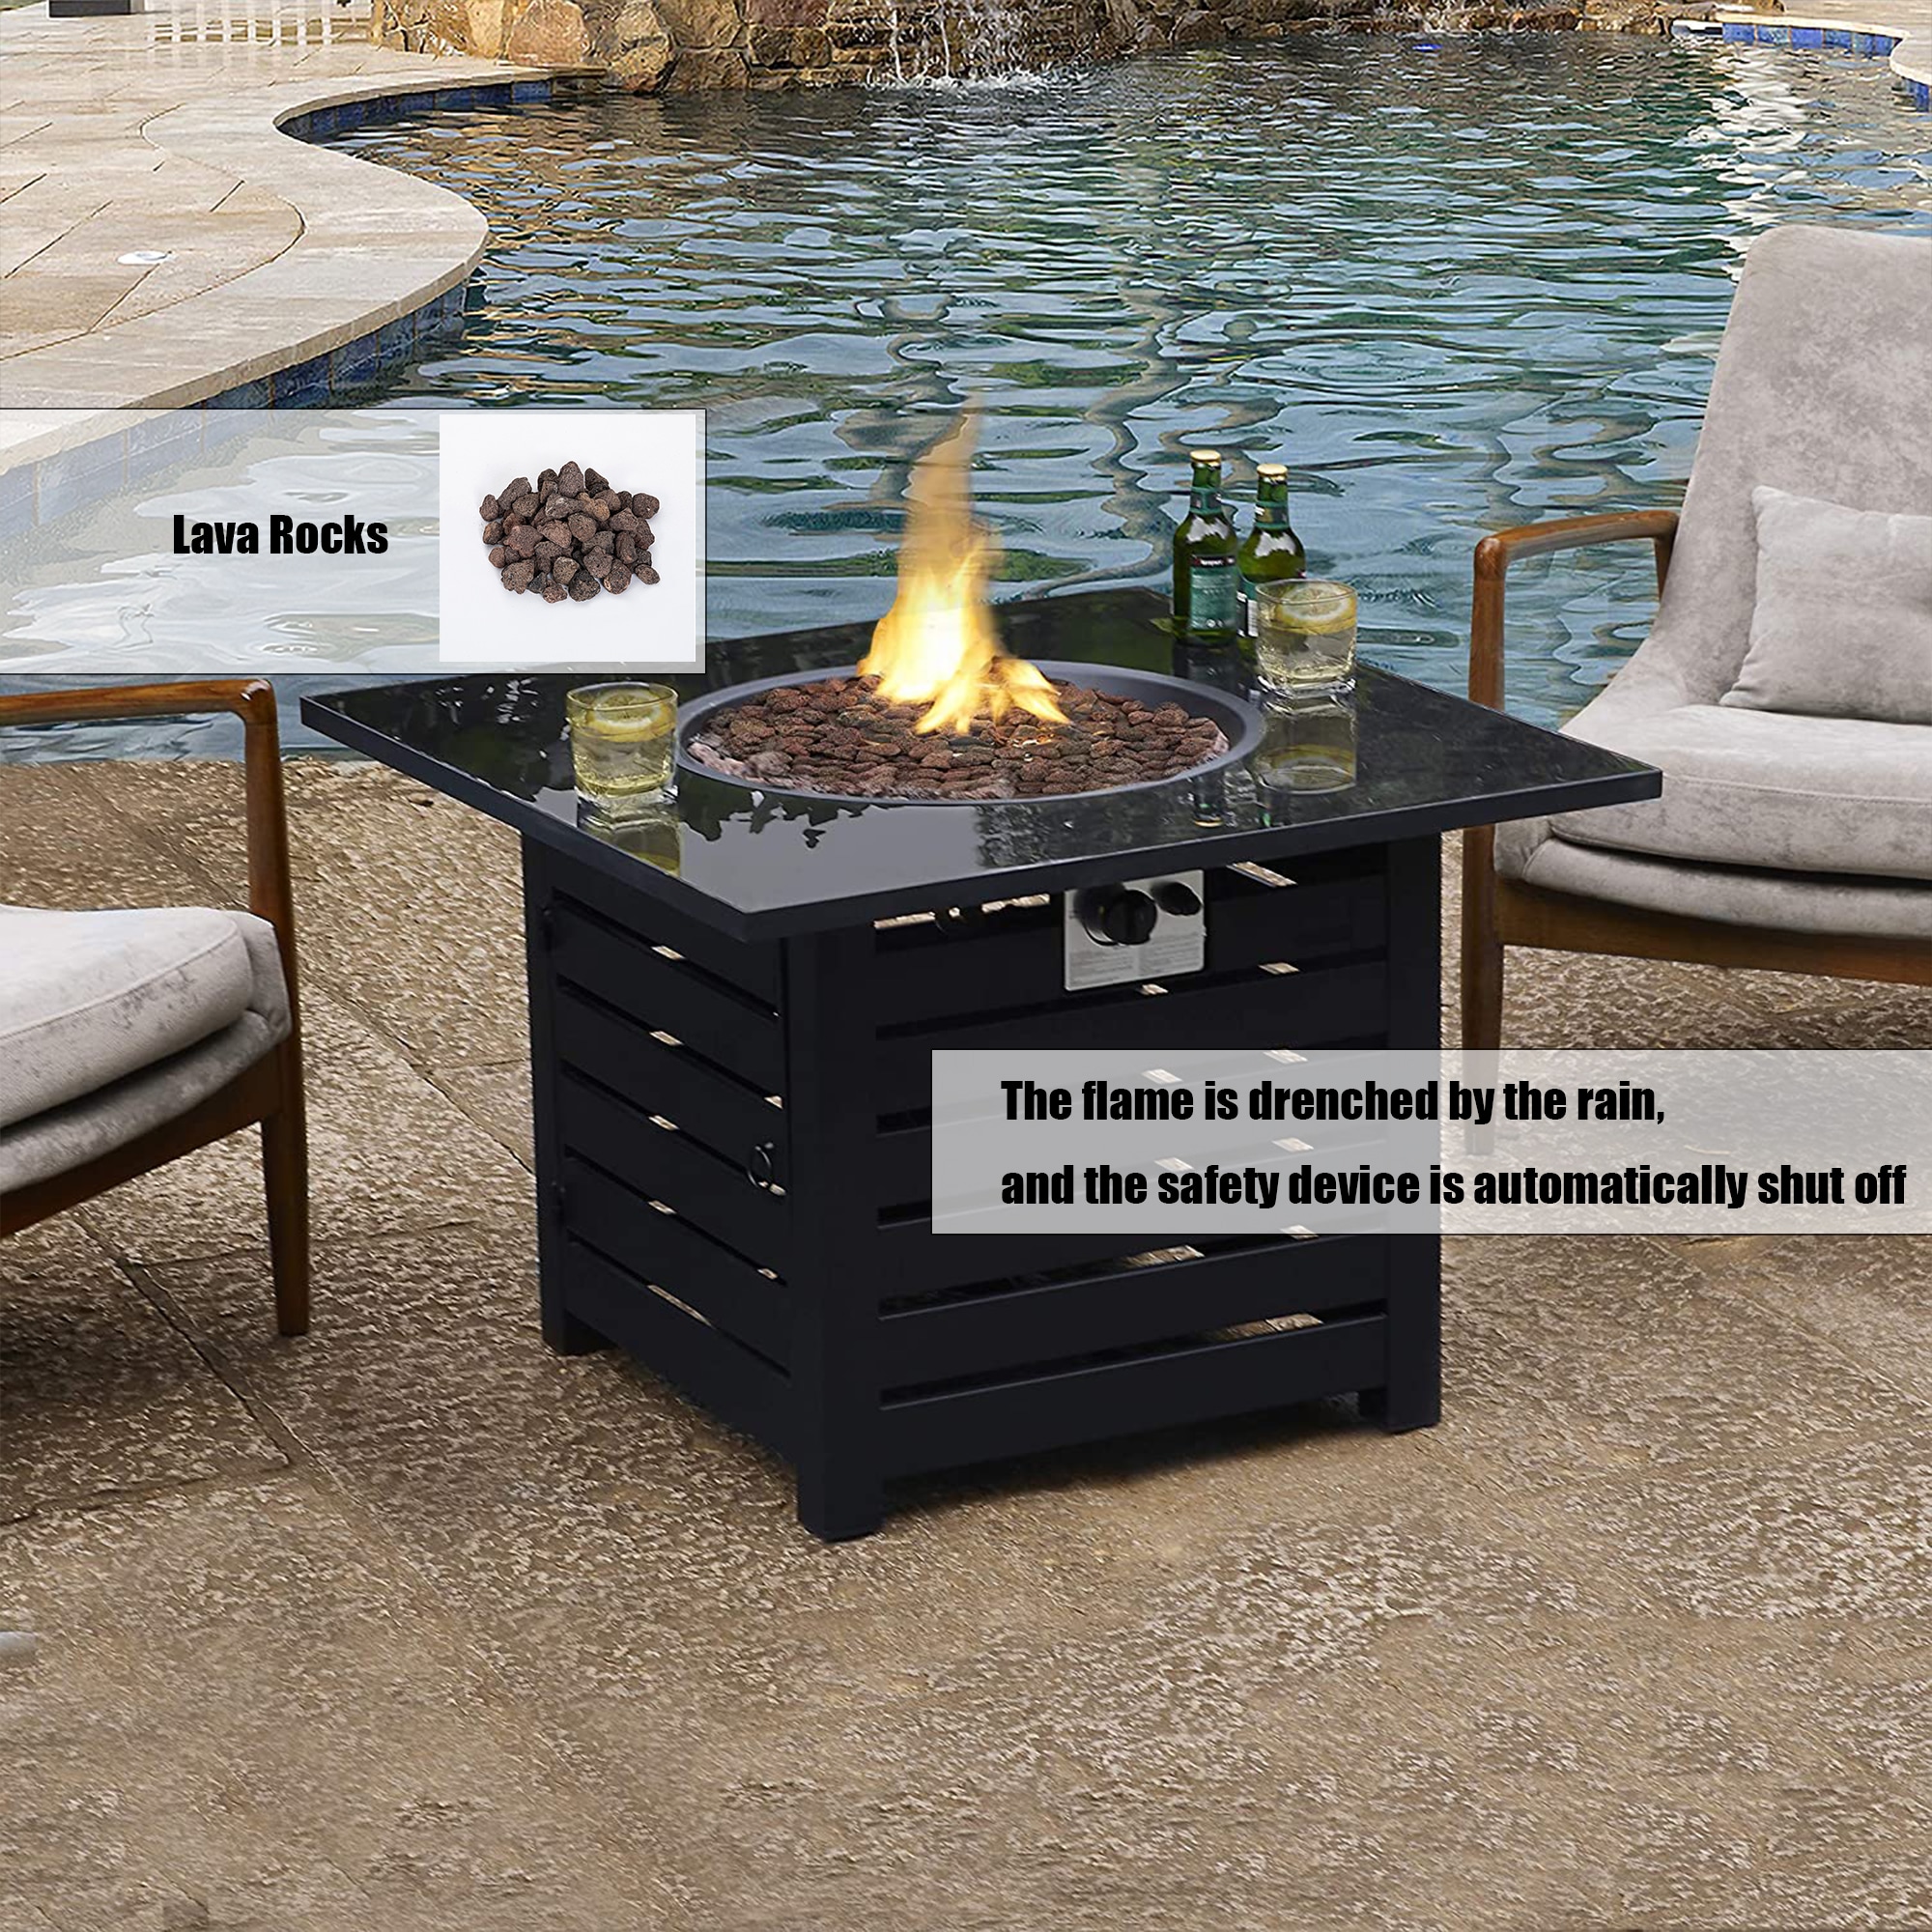 32“ Square 40,000 BTU Auto-Ignition Propane Gas Fire Pit with Waterproof Cover for Courtyard Balcony Garden Terrace Black Ceramic Tabletop Ehomeline Fire Pit Table CSA Certification 